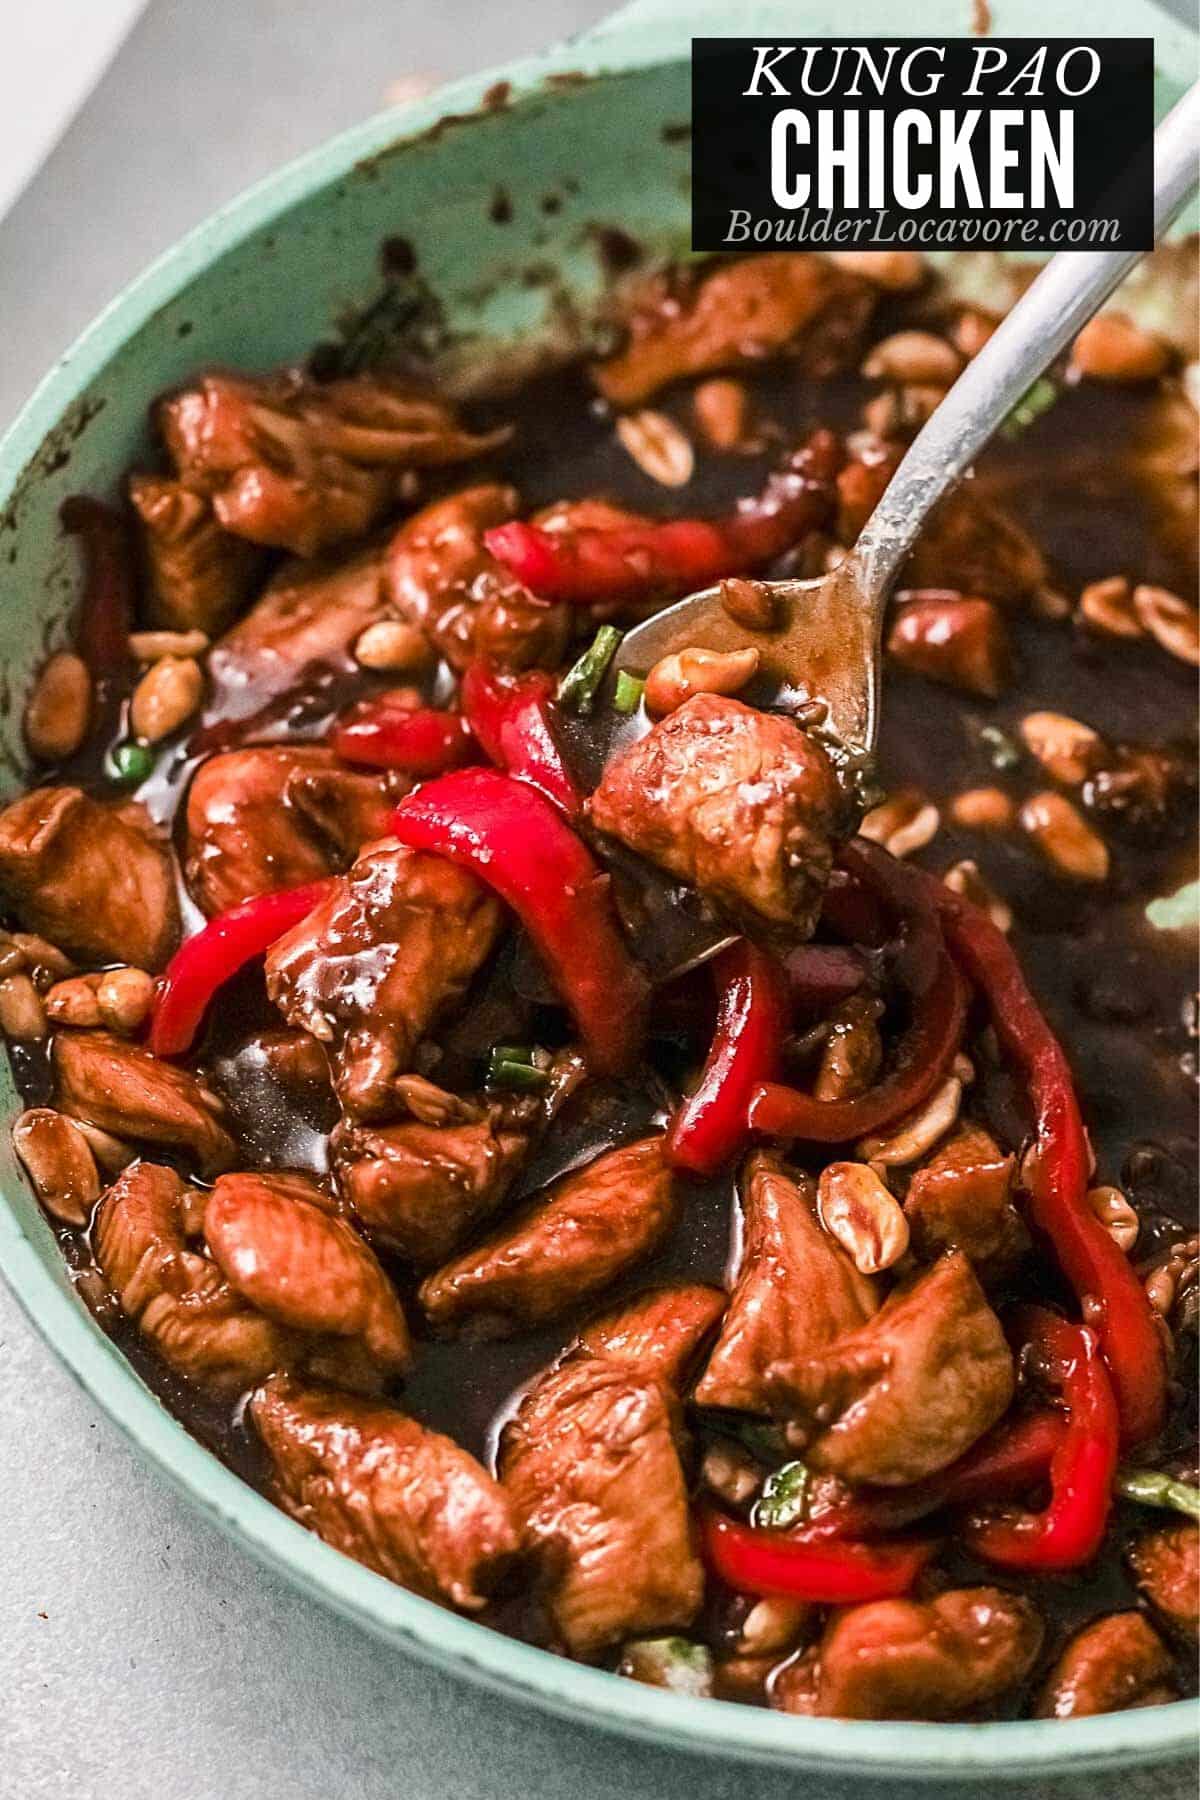 Kung Pao Chicken title